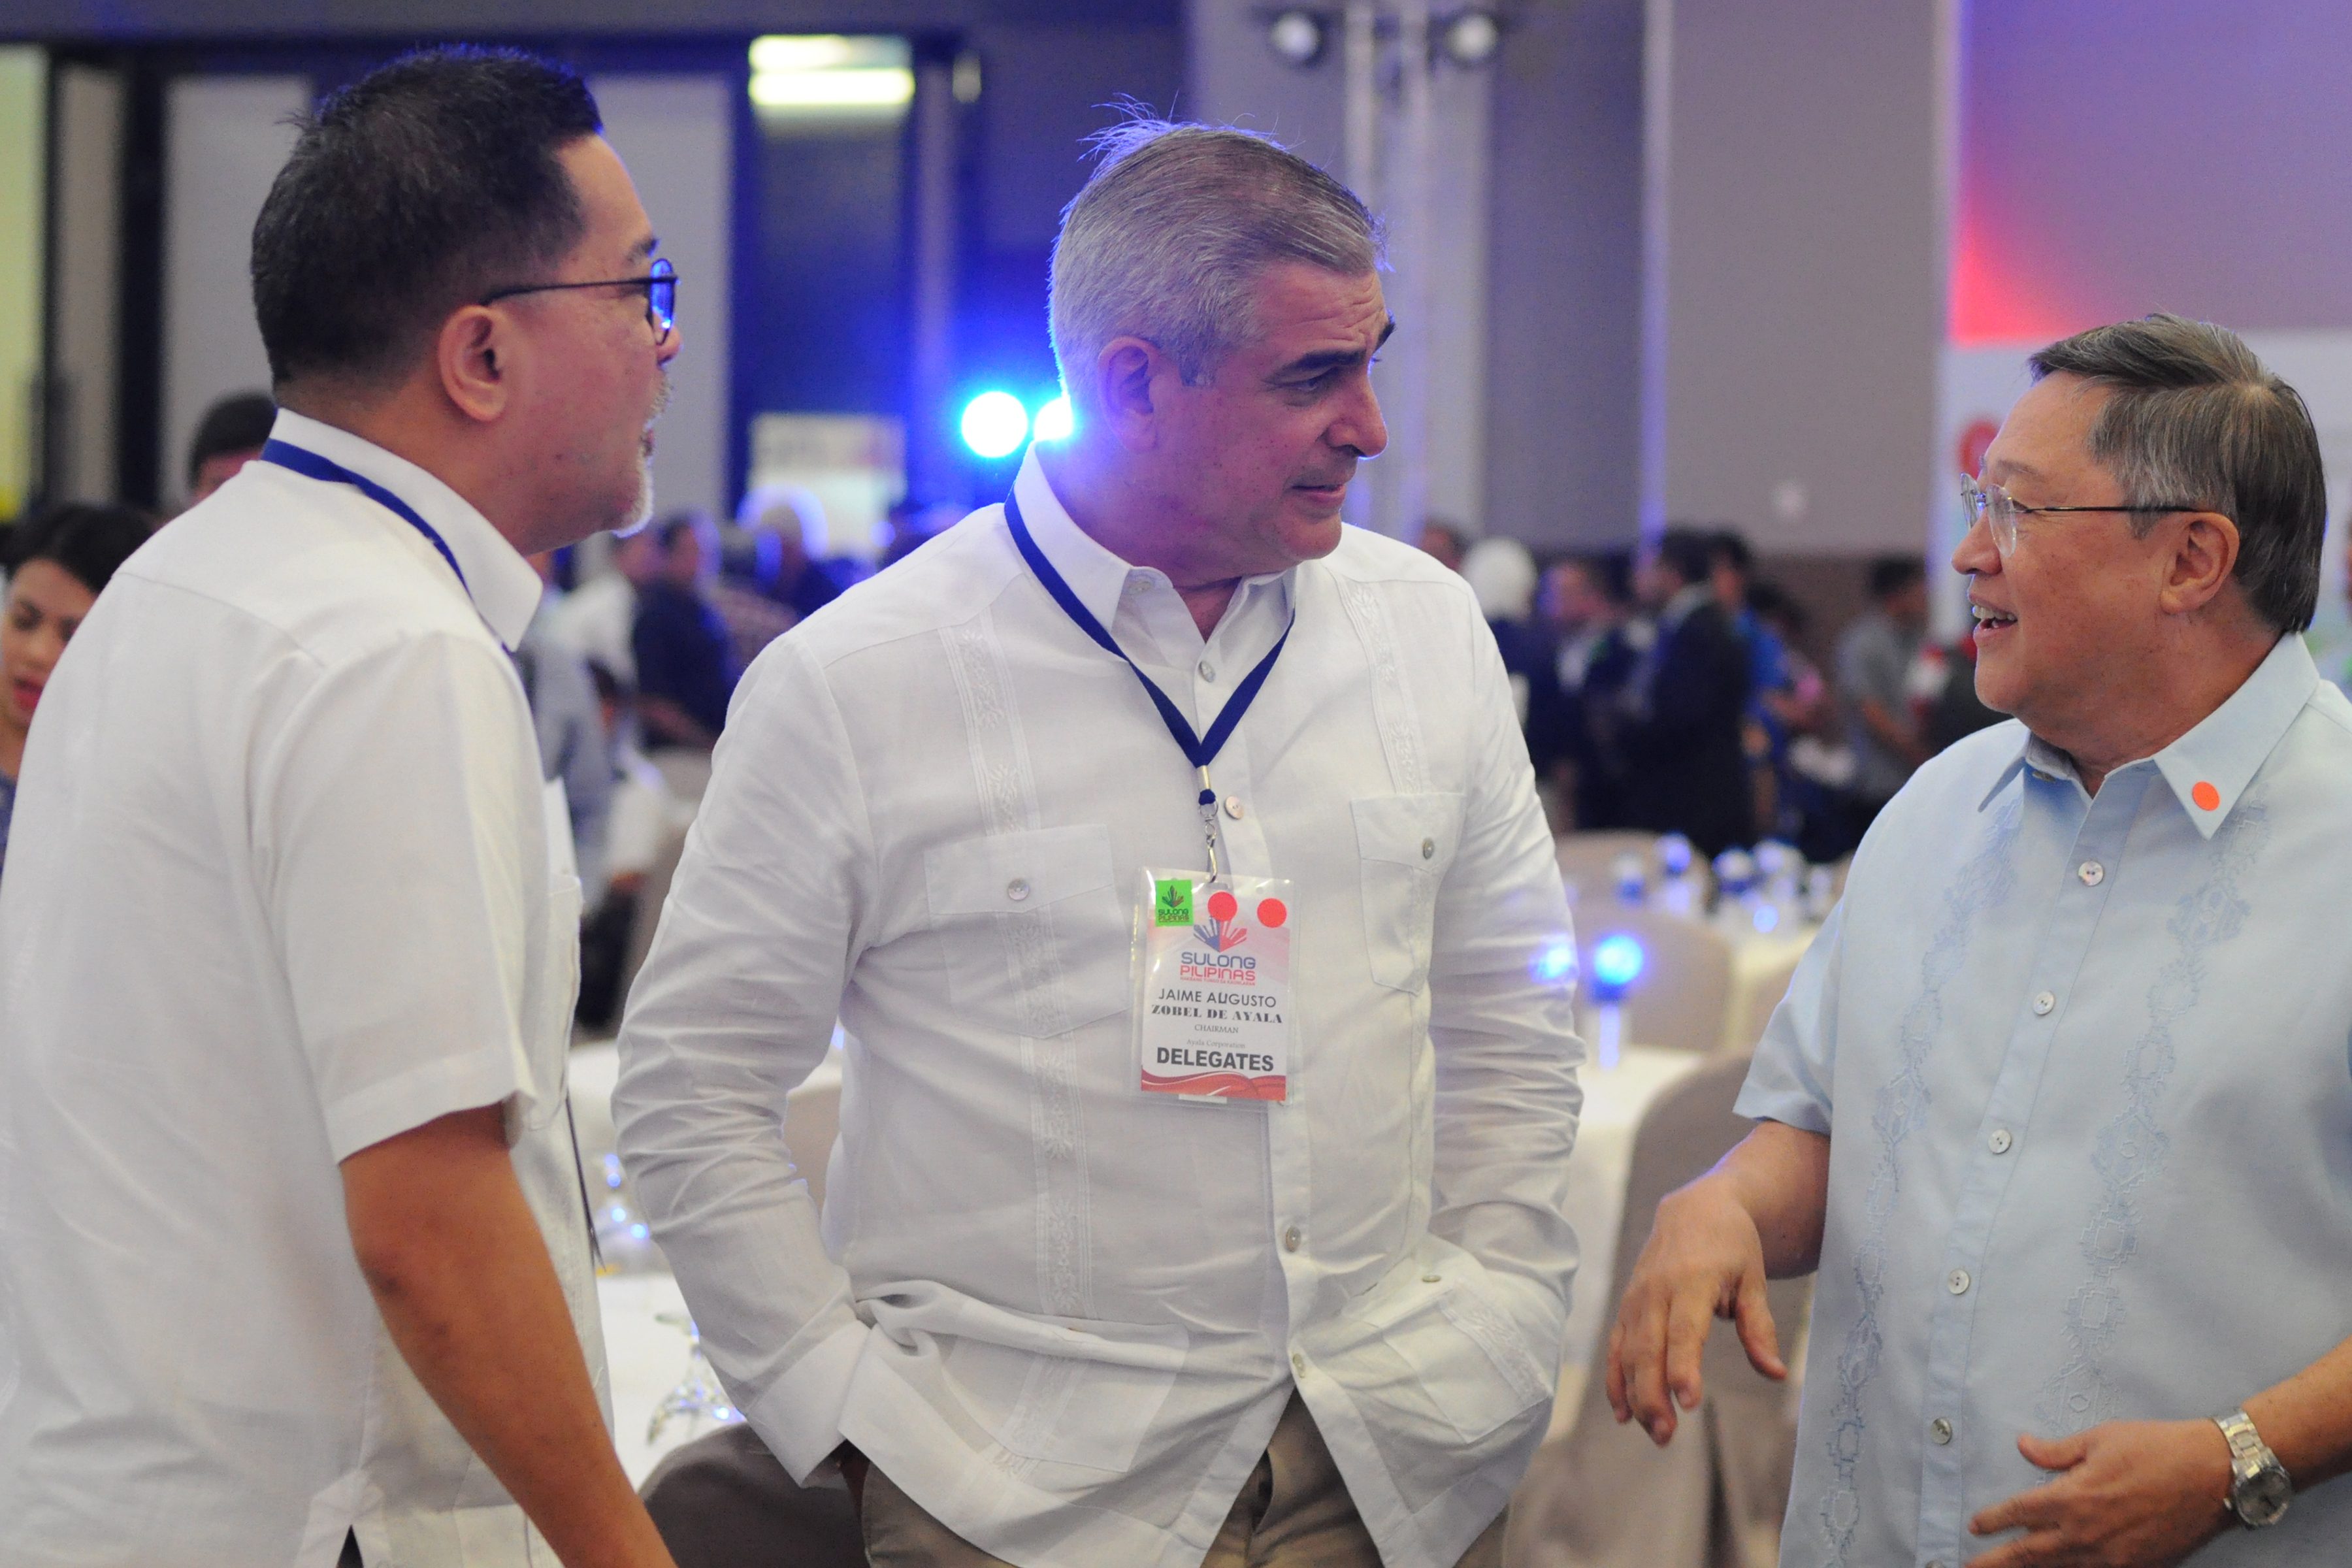 'BEST MINDS IN BUSINESS.' Incoming Finance Secretary Sonny Dominguez chats with Ayala Corporation CEO Jaime Augusto Zobel De Ayala during the 'Sulong Pilipinas' forum. Photo from Sulong Pilipinas 